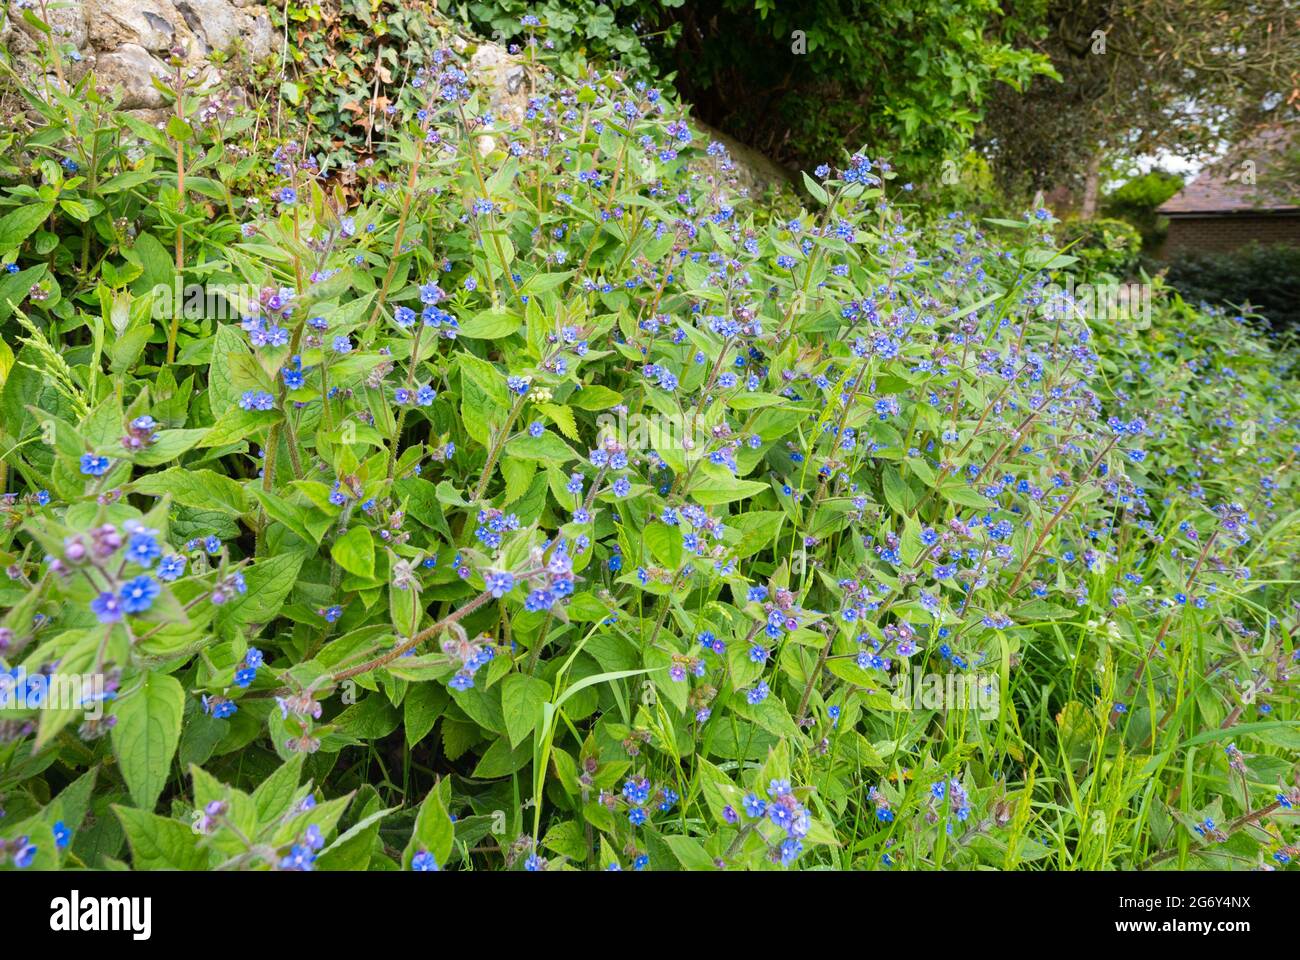 Green Alkanet (Pentaglottis sempervirens) plant, AKA Evergreen Alkanet, part of the Forget Me Not family with small blue flowers in Spring in the UK. Stock Photo